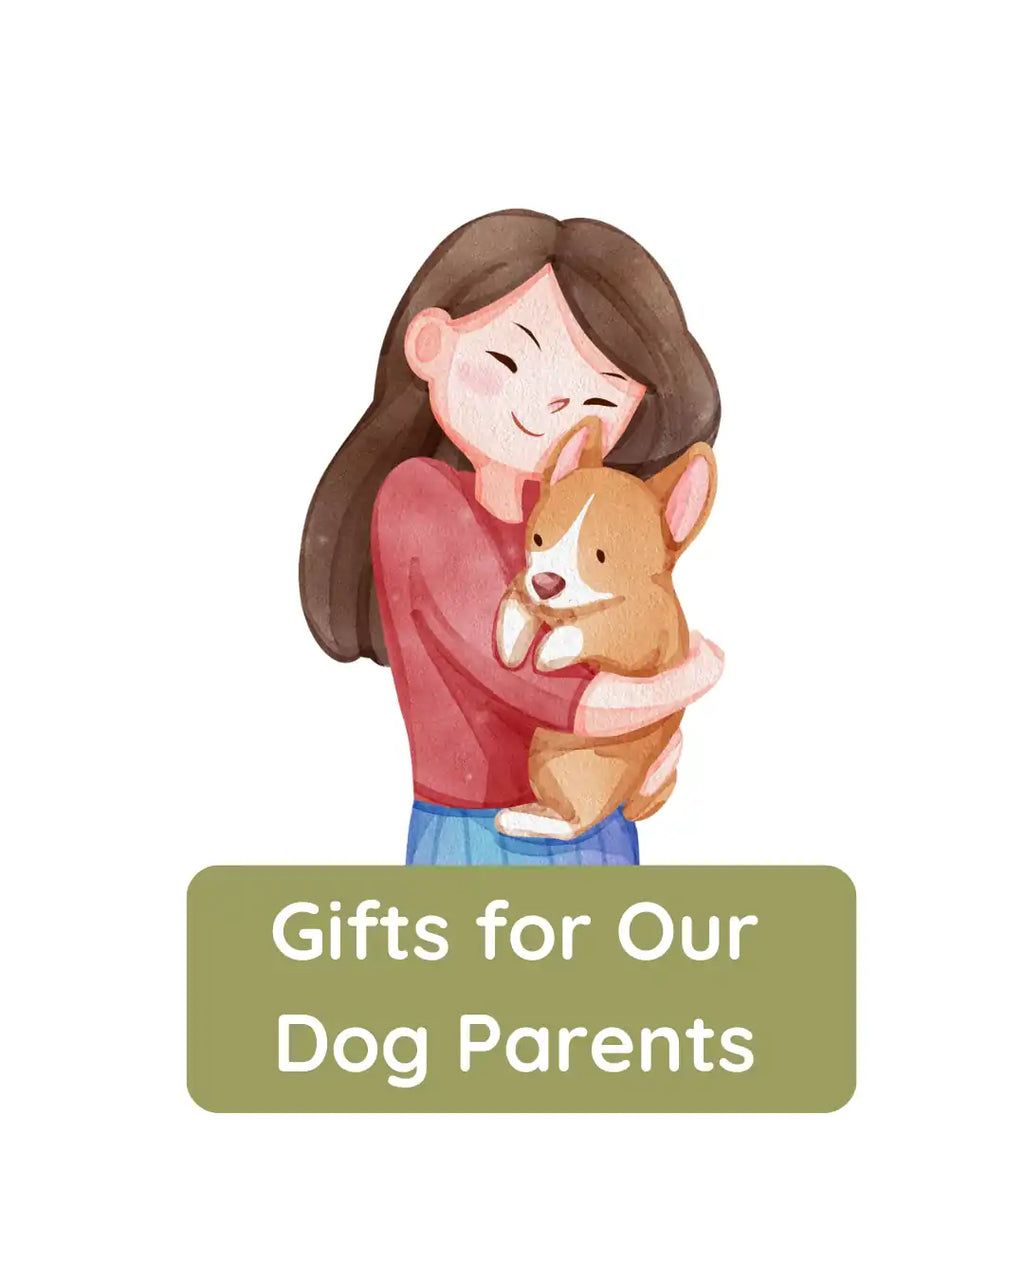 Gifts for Our Dog Parents